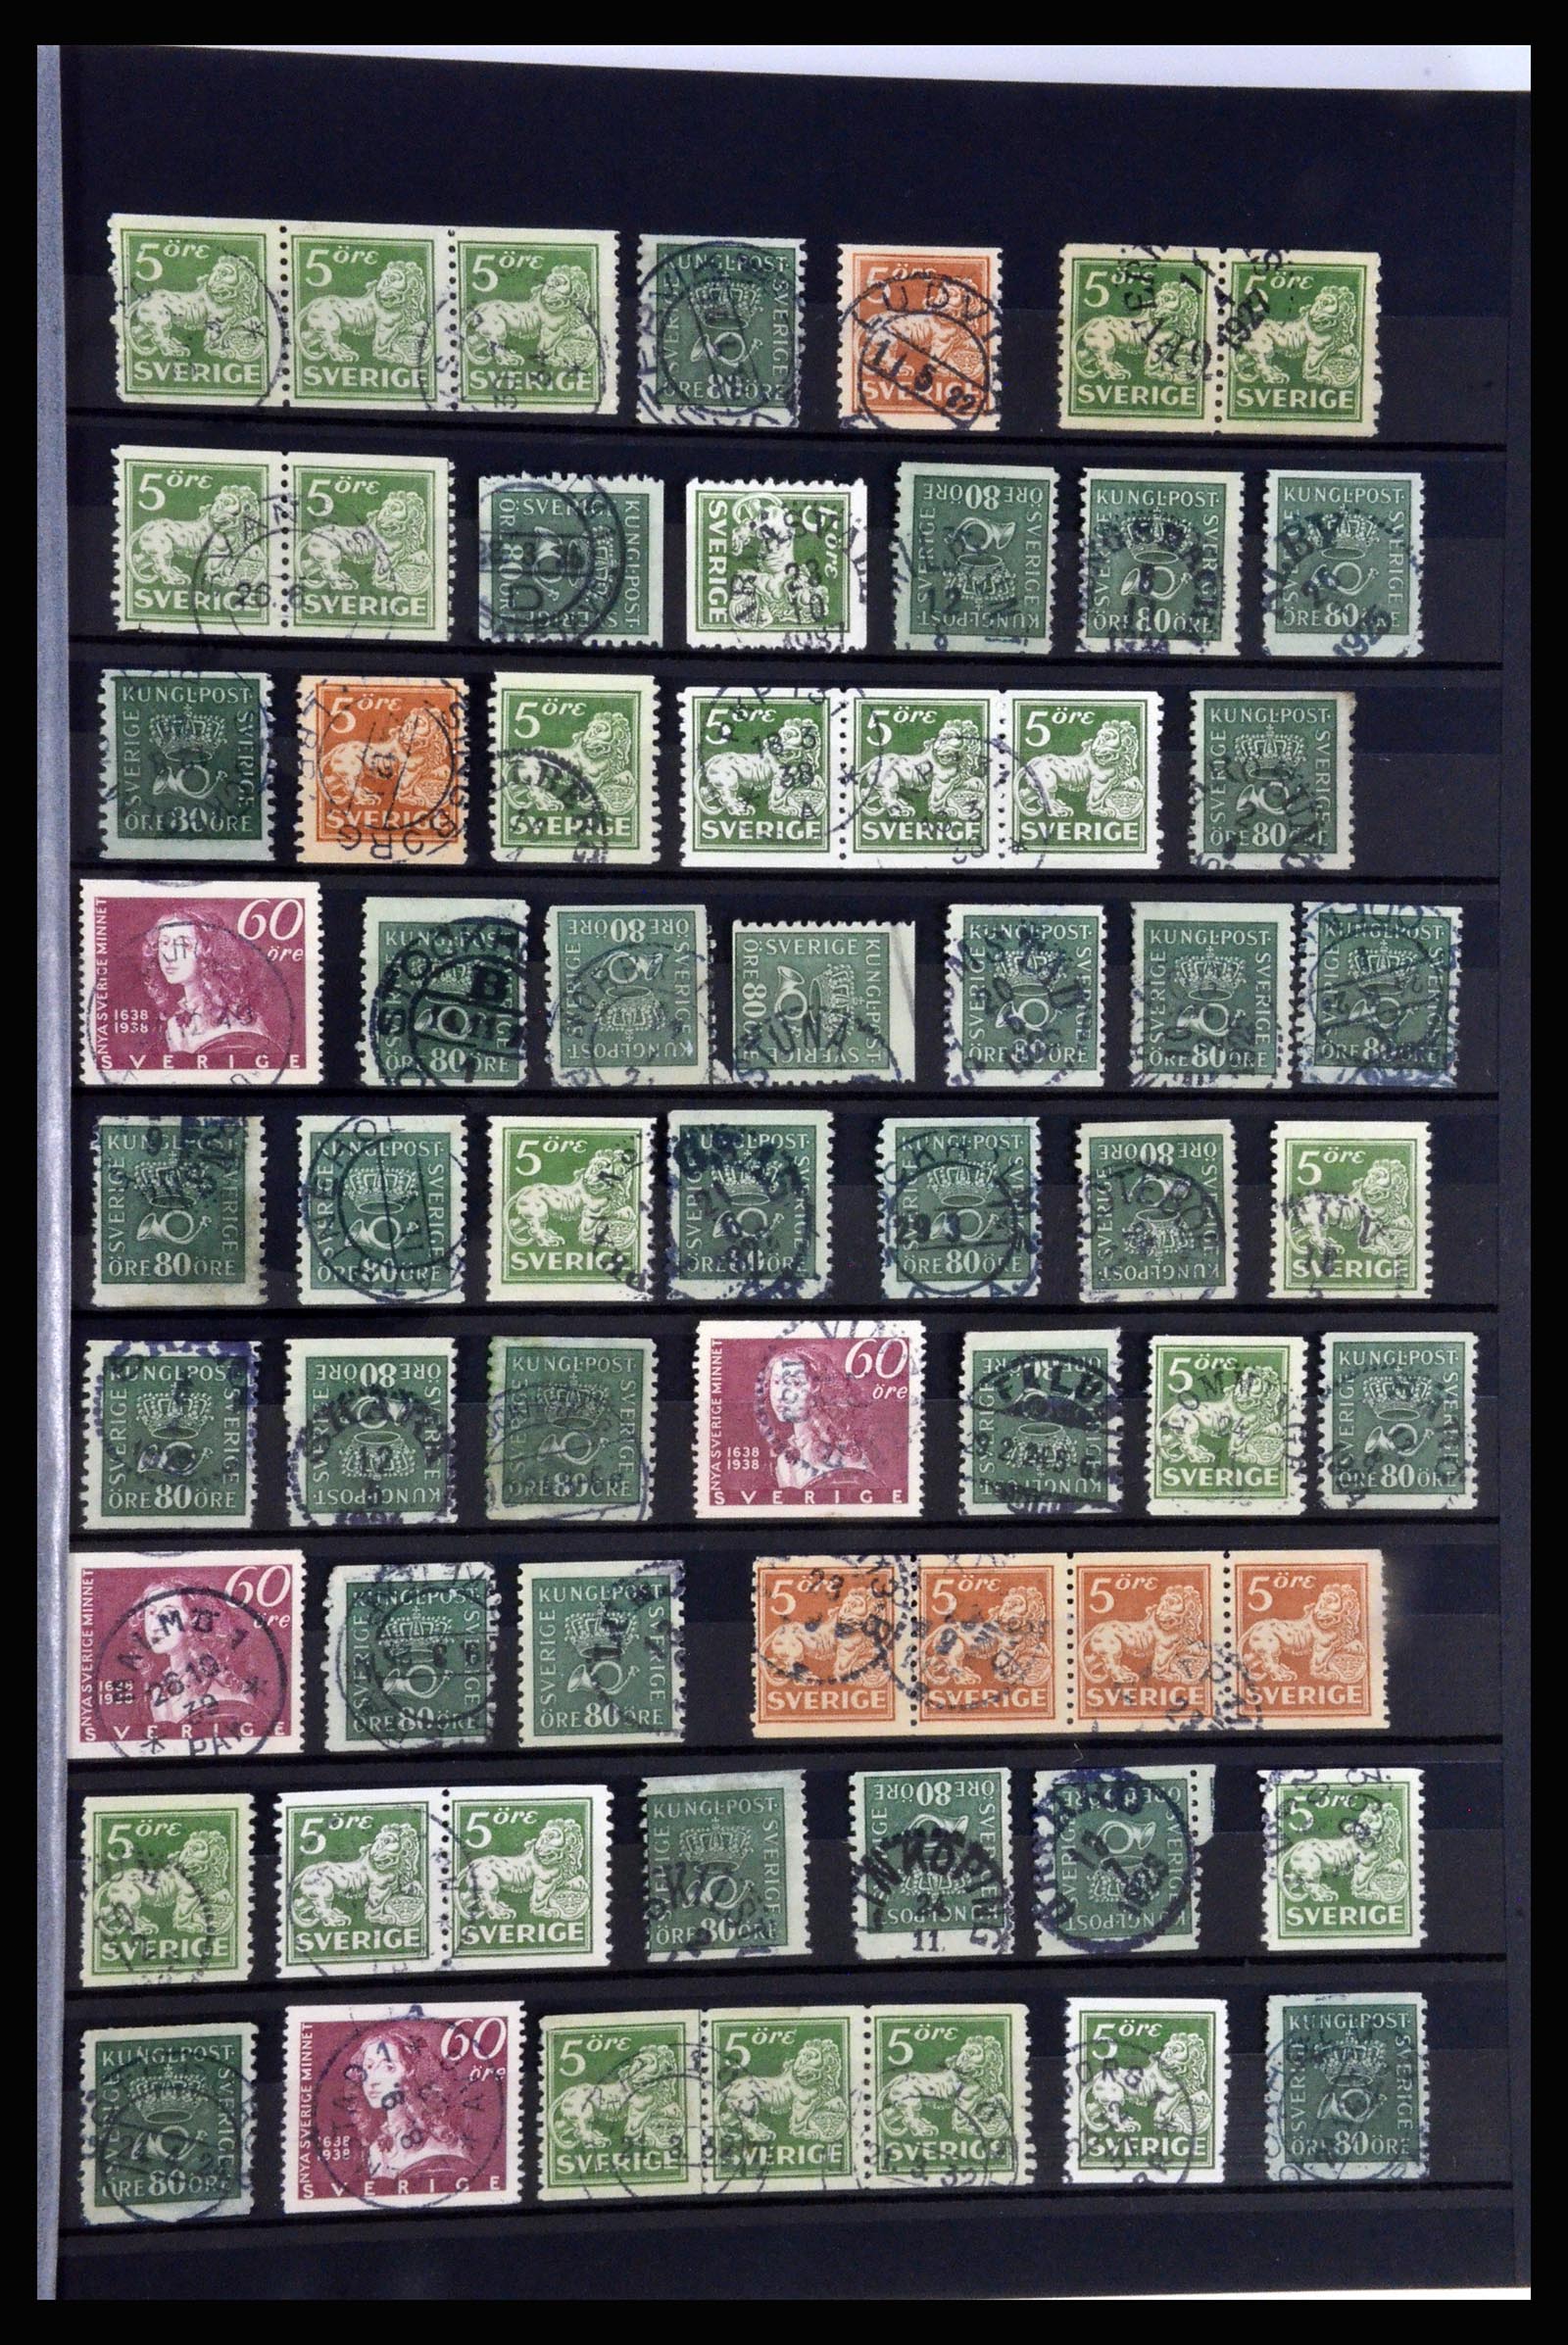 36316 011 - Stamp collection 36316 Sweden cancellations 1920-1938.